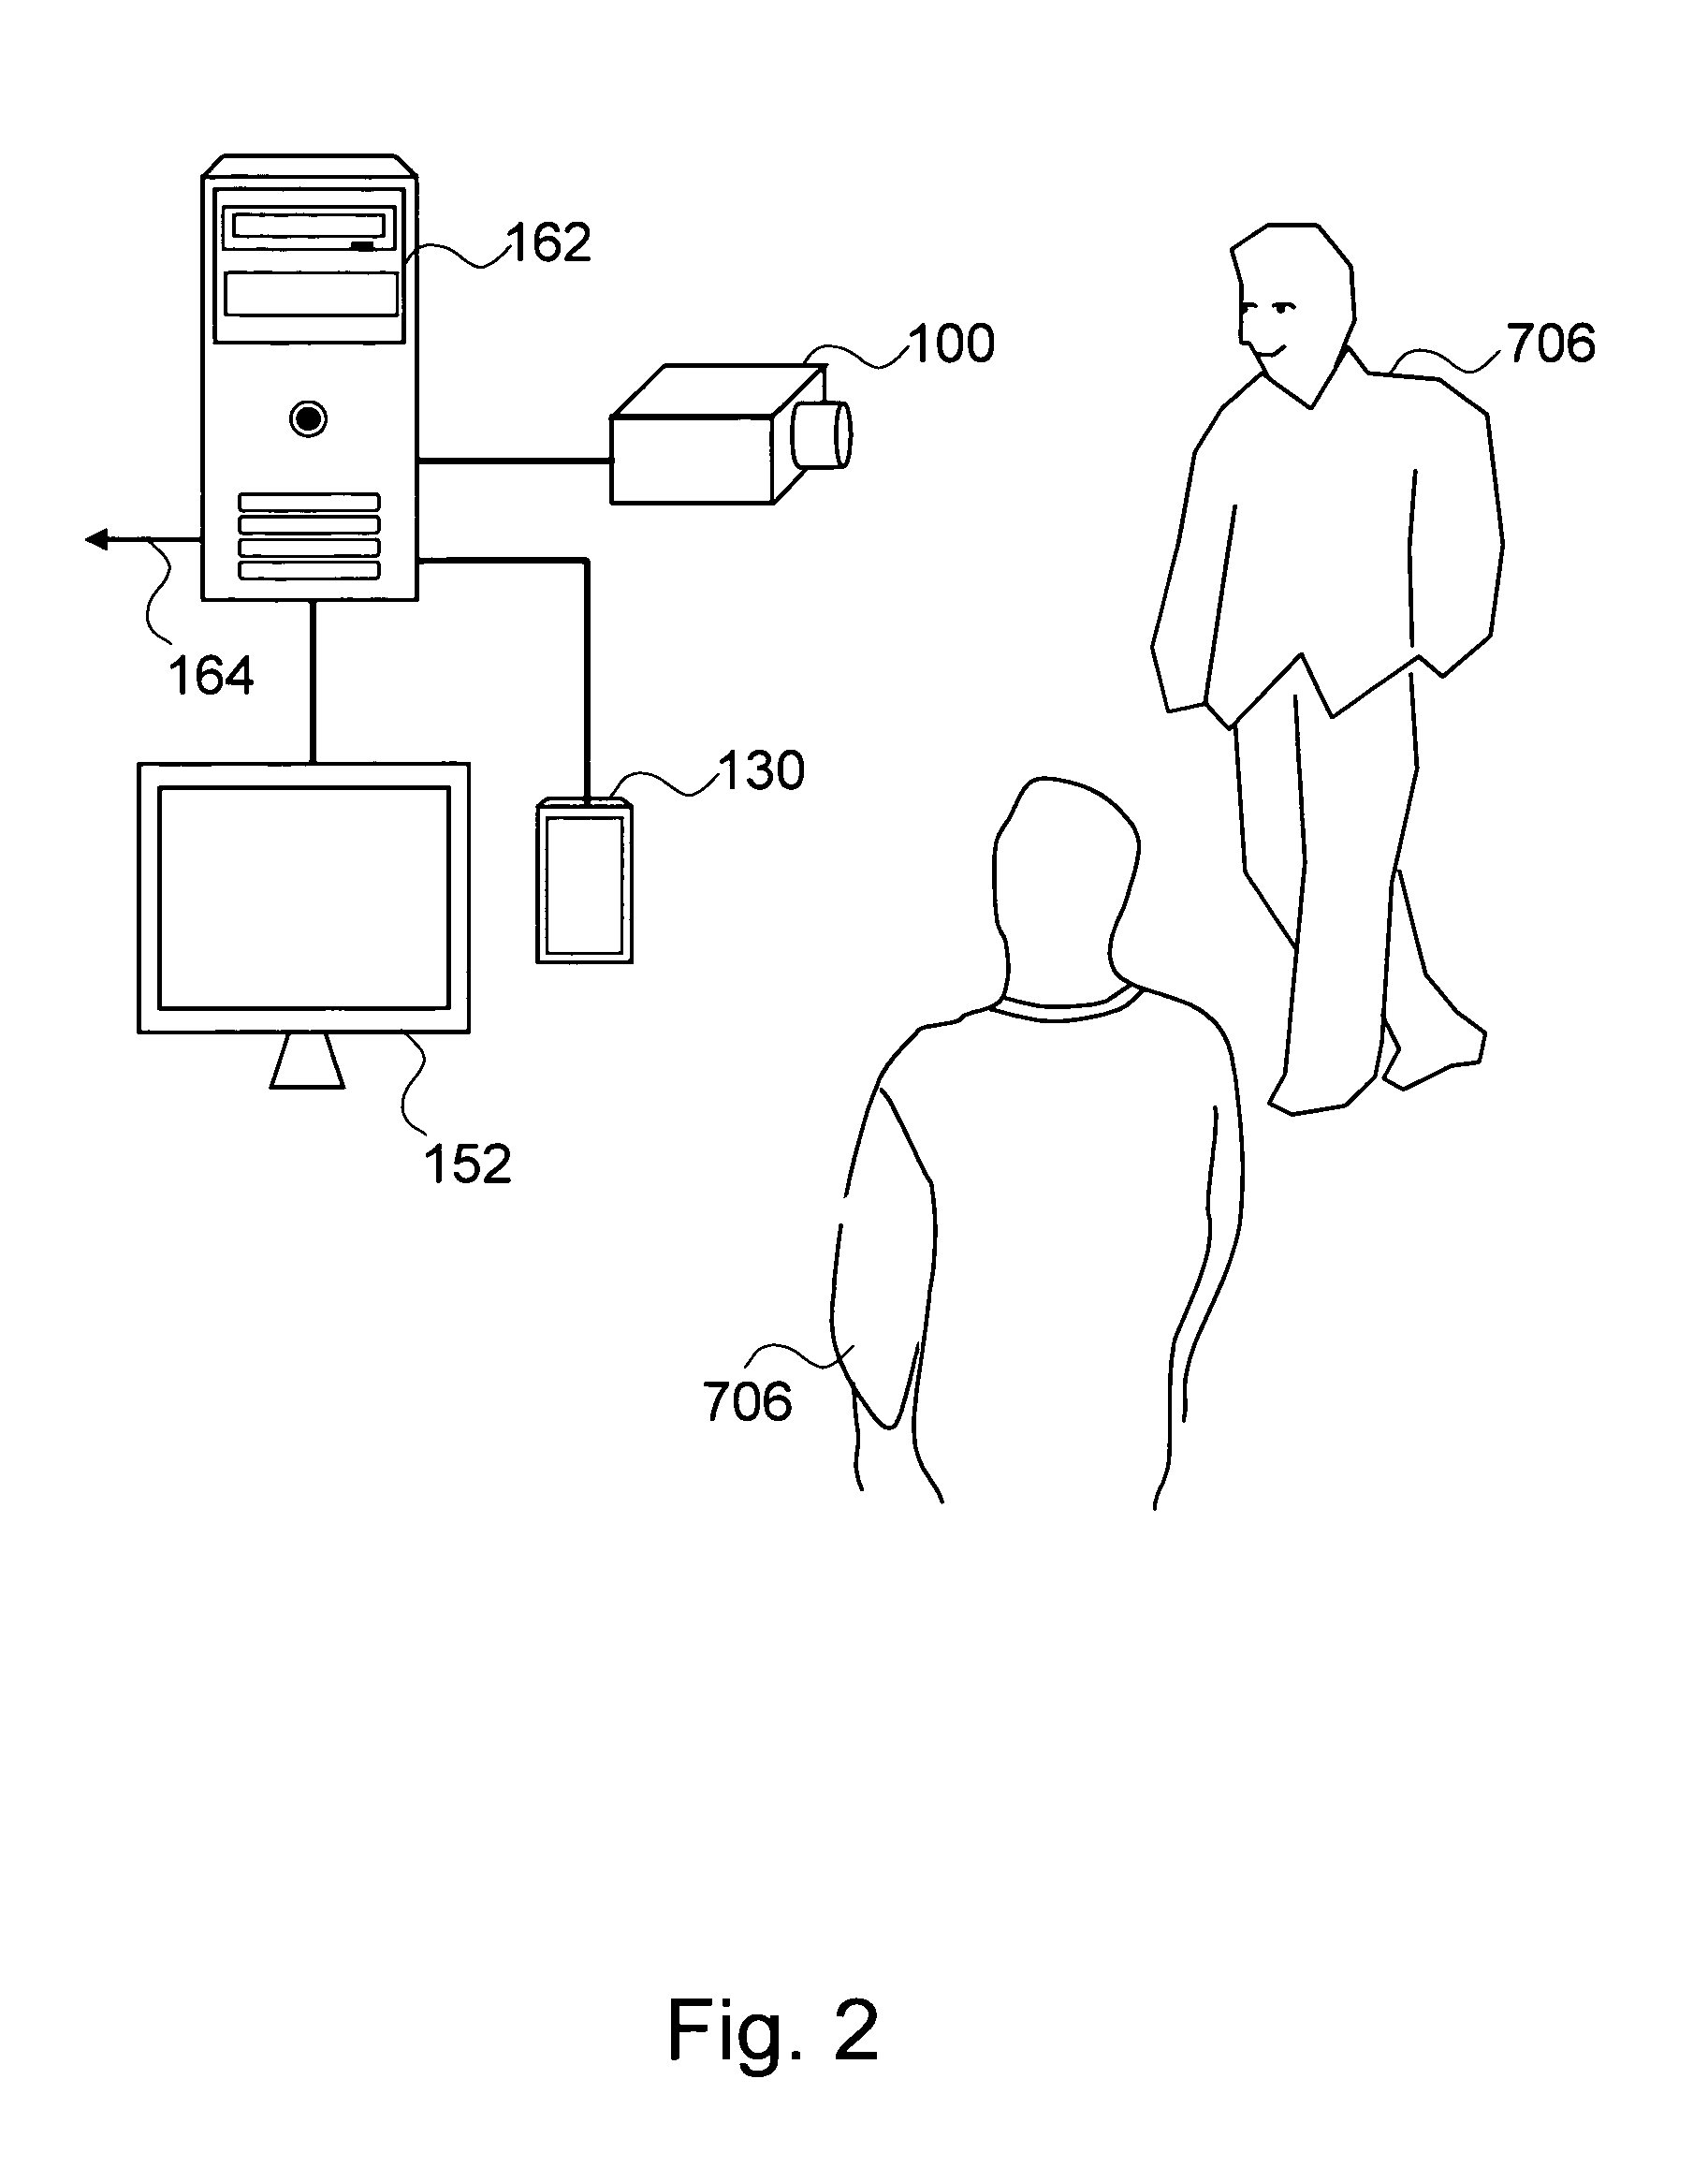 Method and system for determining the age category of people based on facial images